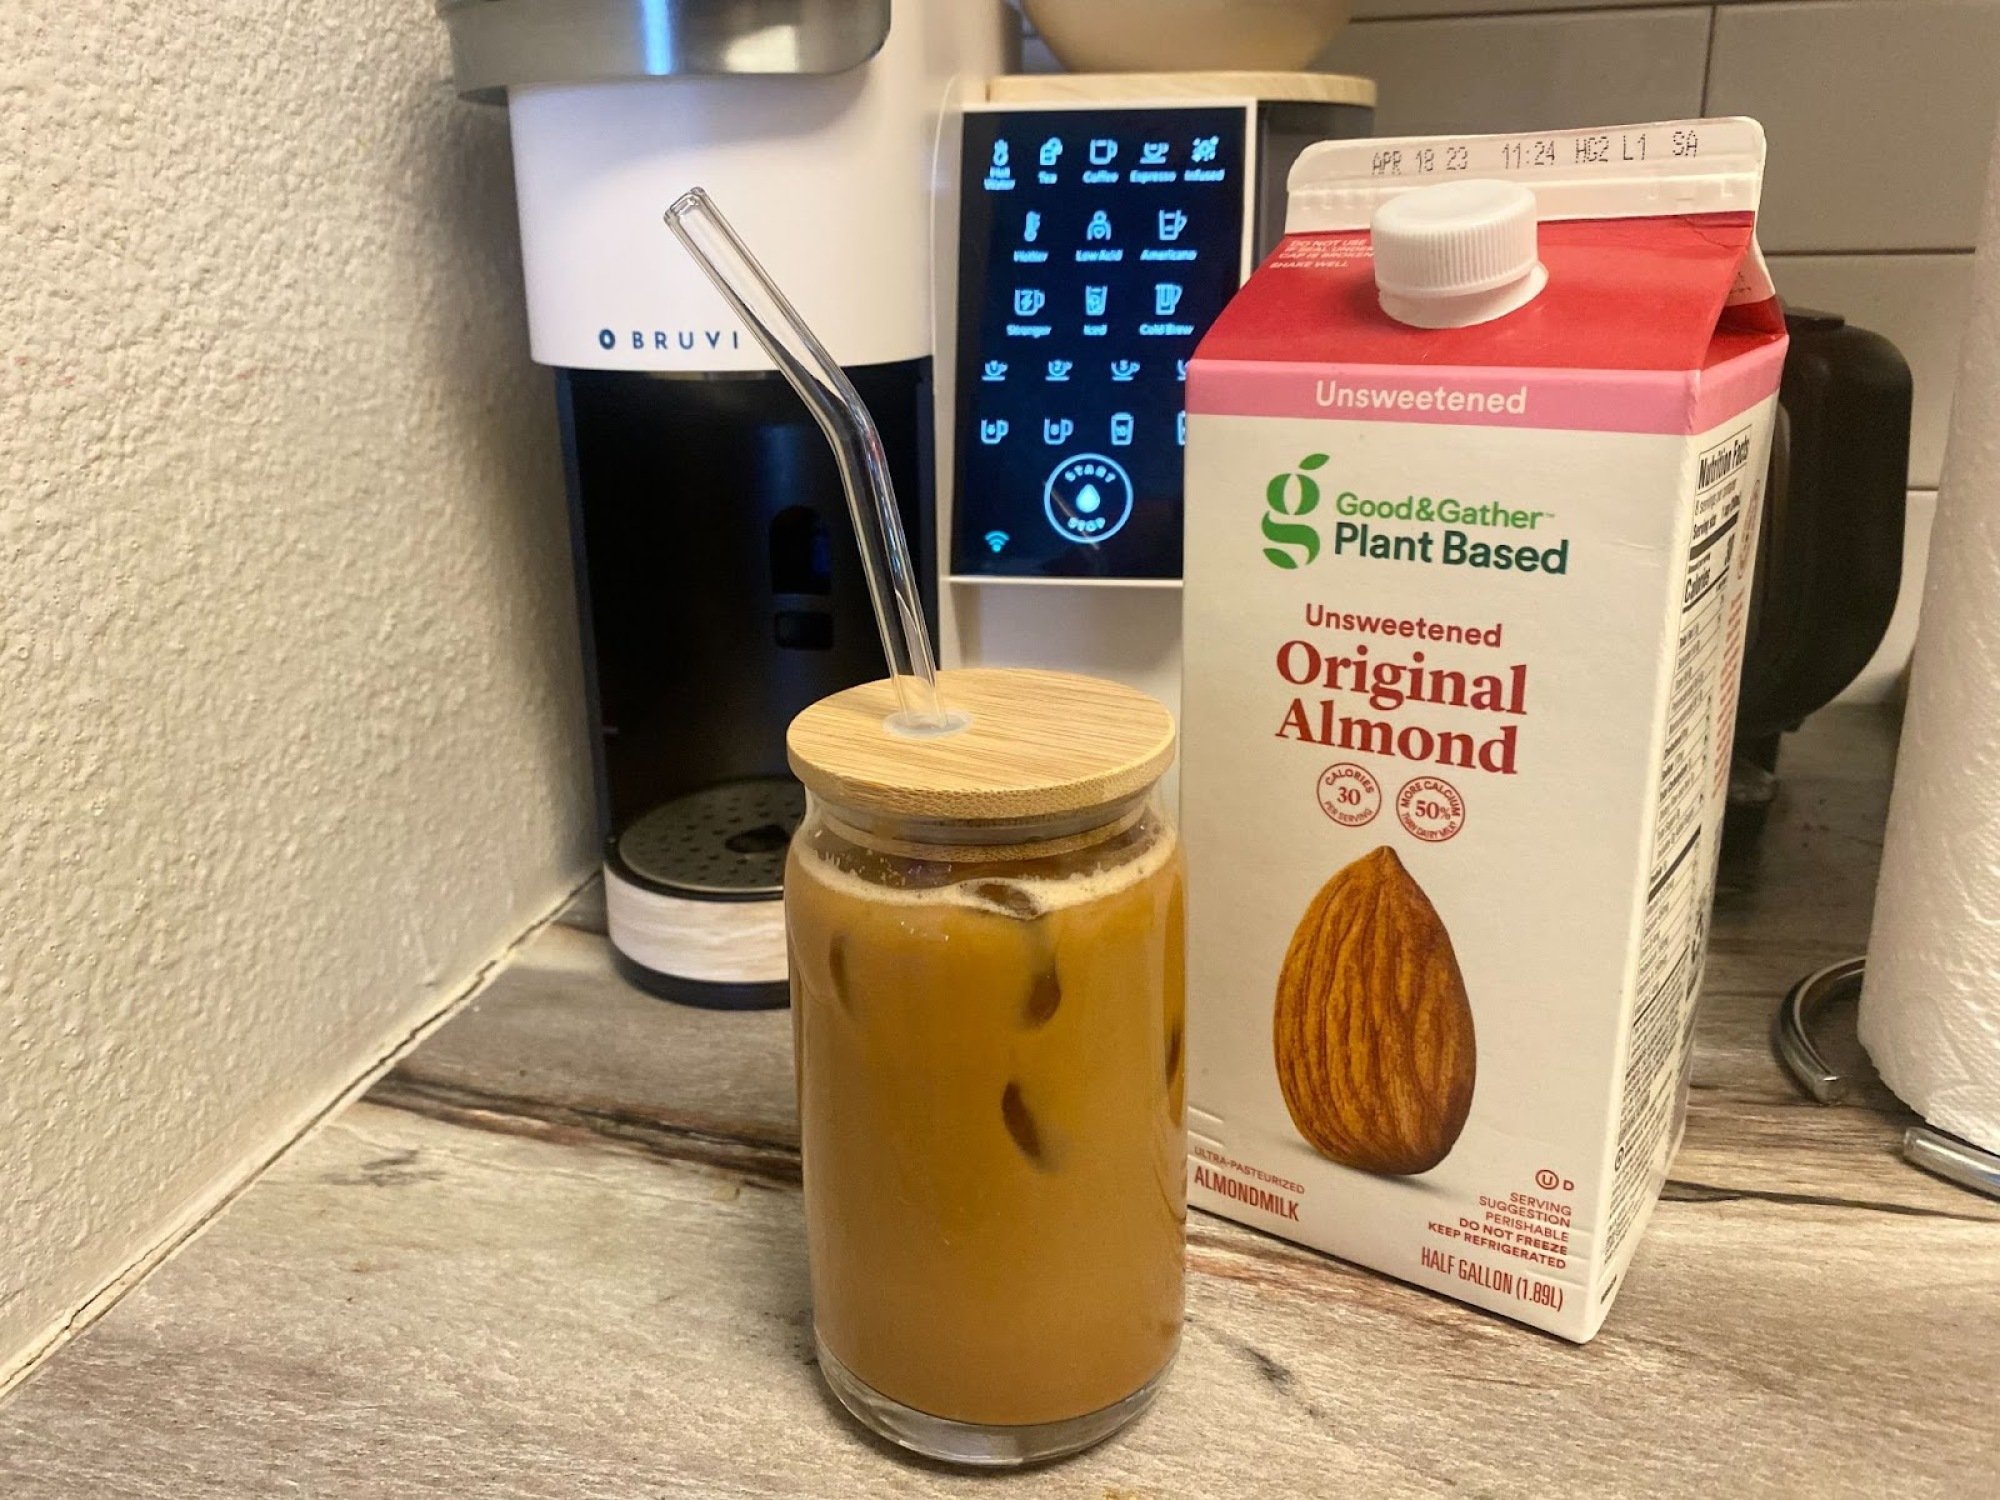 iced coffee in glass cup with straw next to carton of almond milk and Bruvi coffee maker